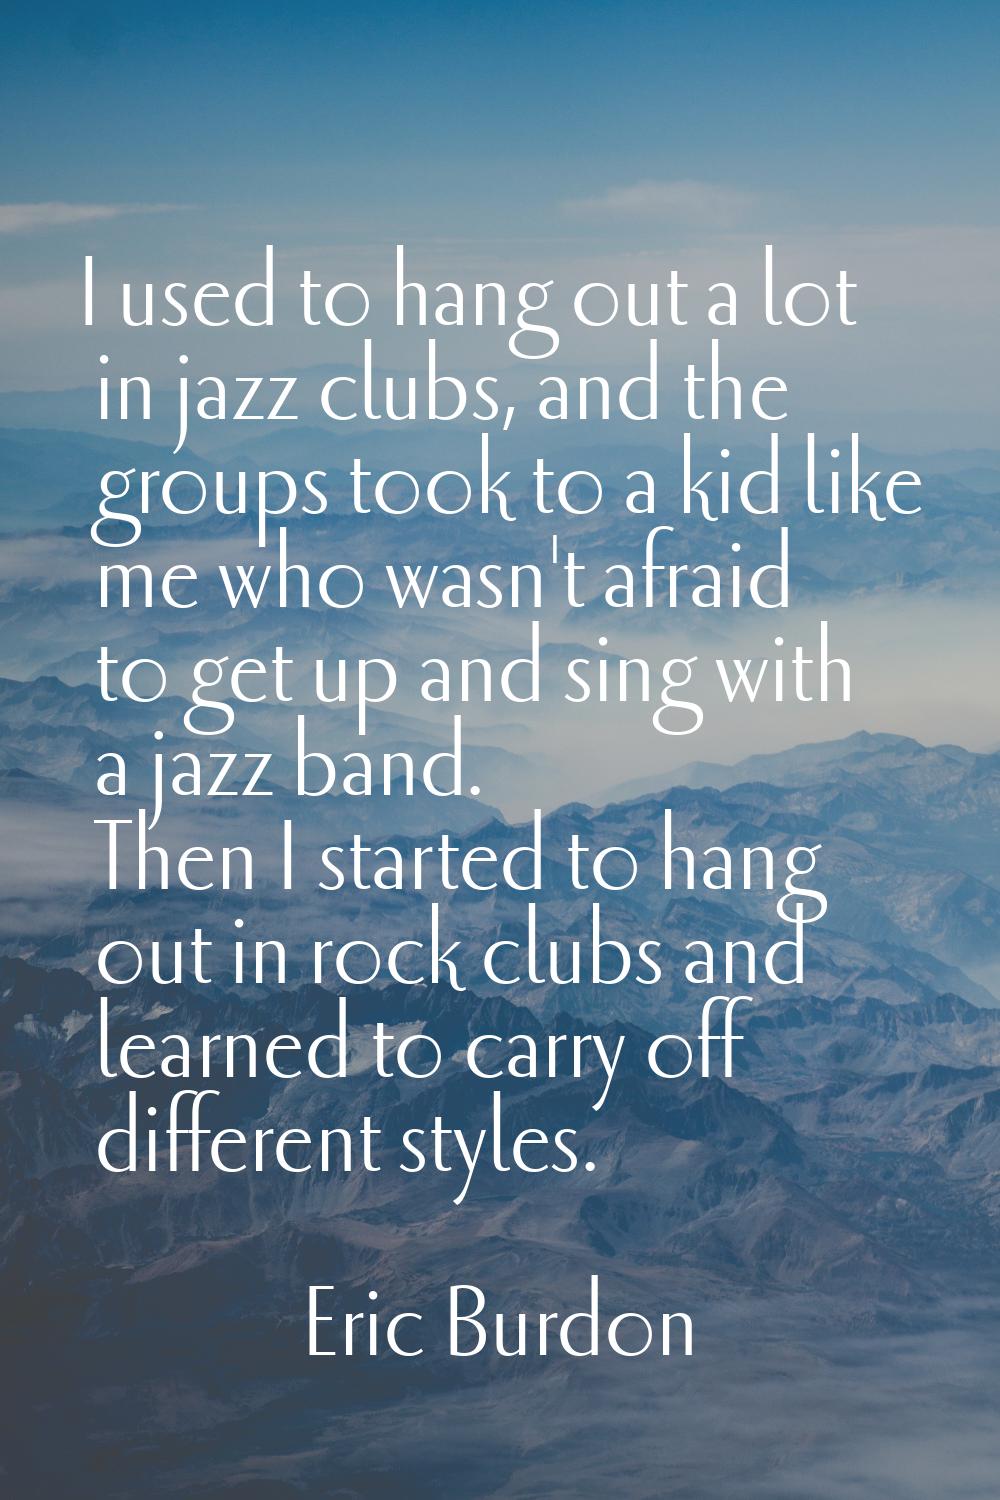 I used to hang out a lot in jazz clubs, and the groups took to a kid like me who wasn't afraid to g